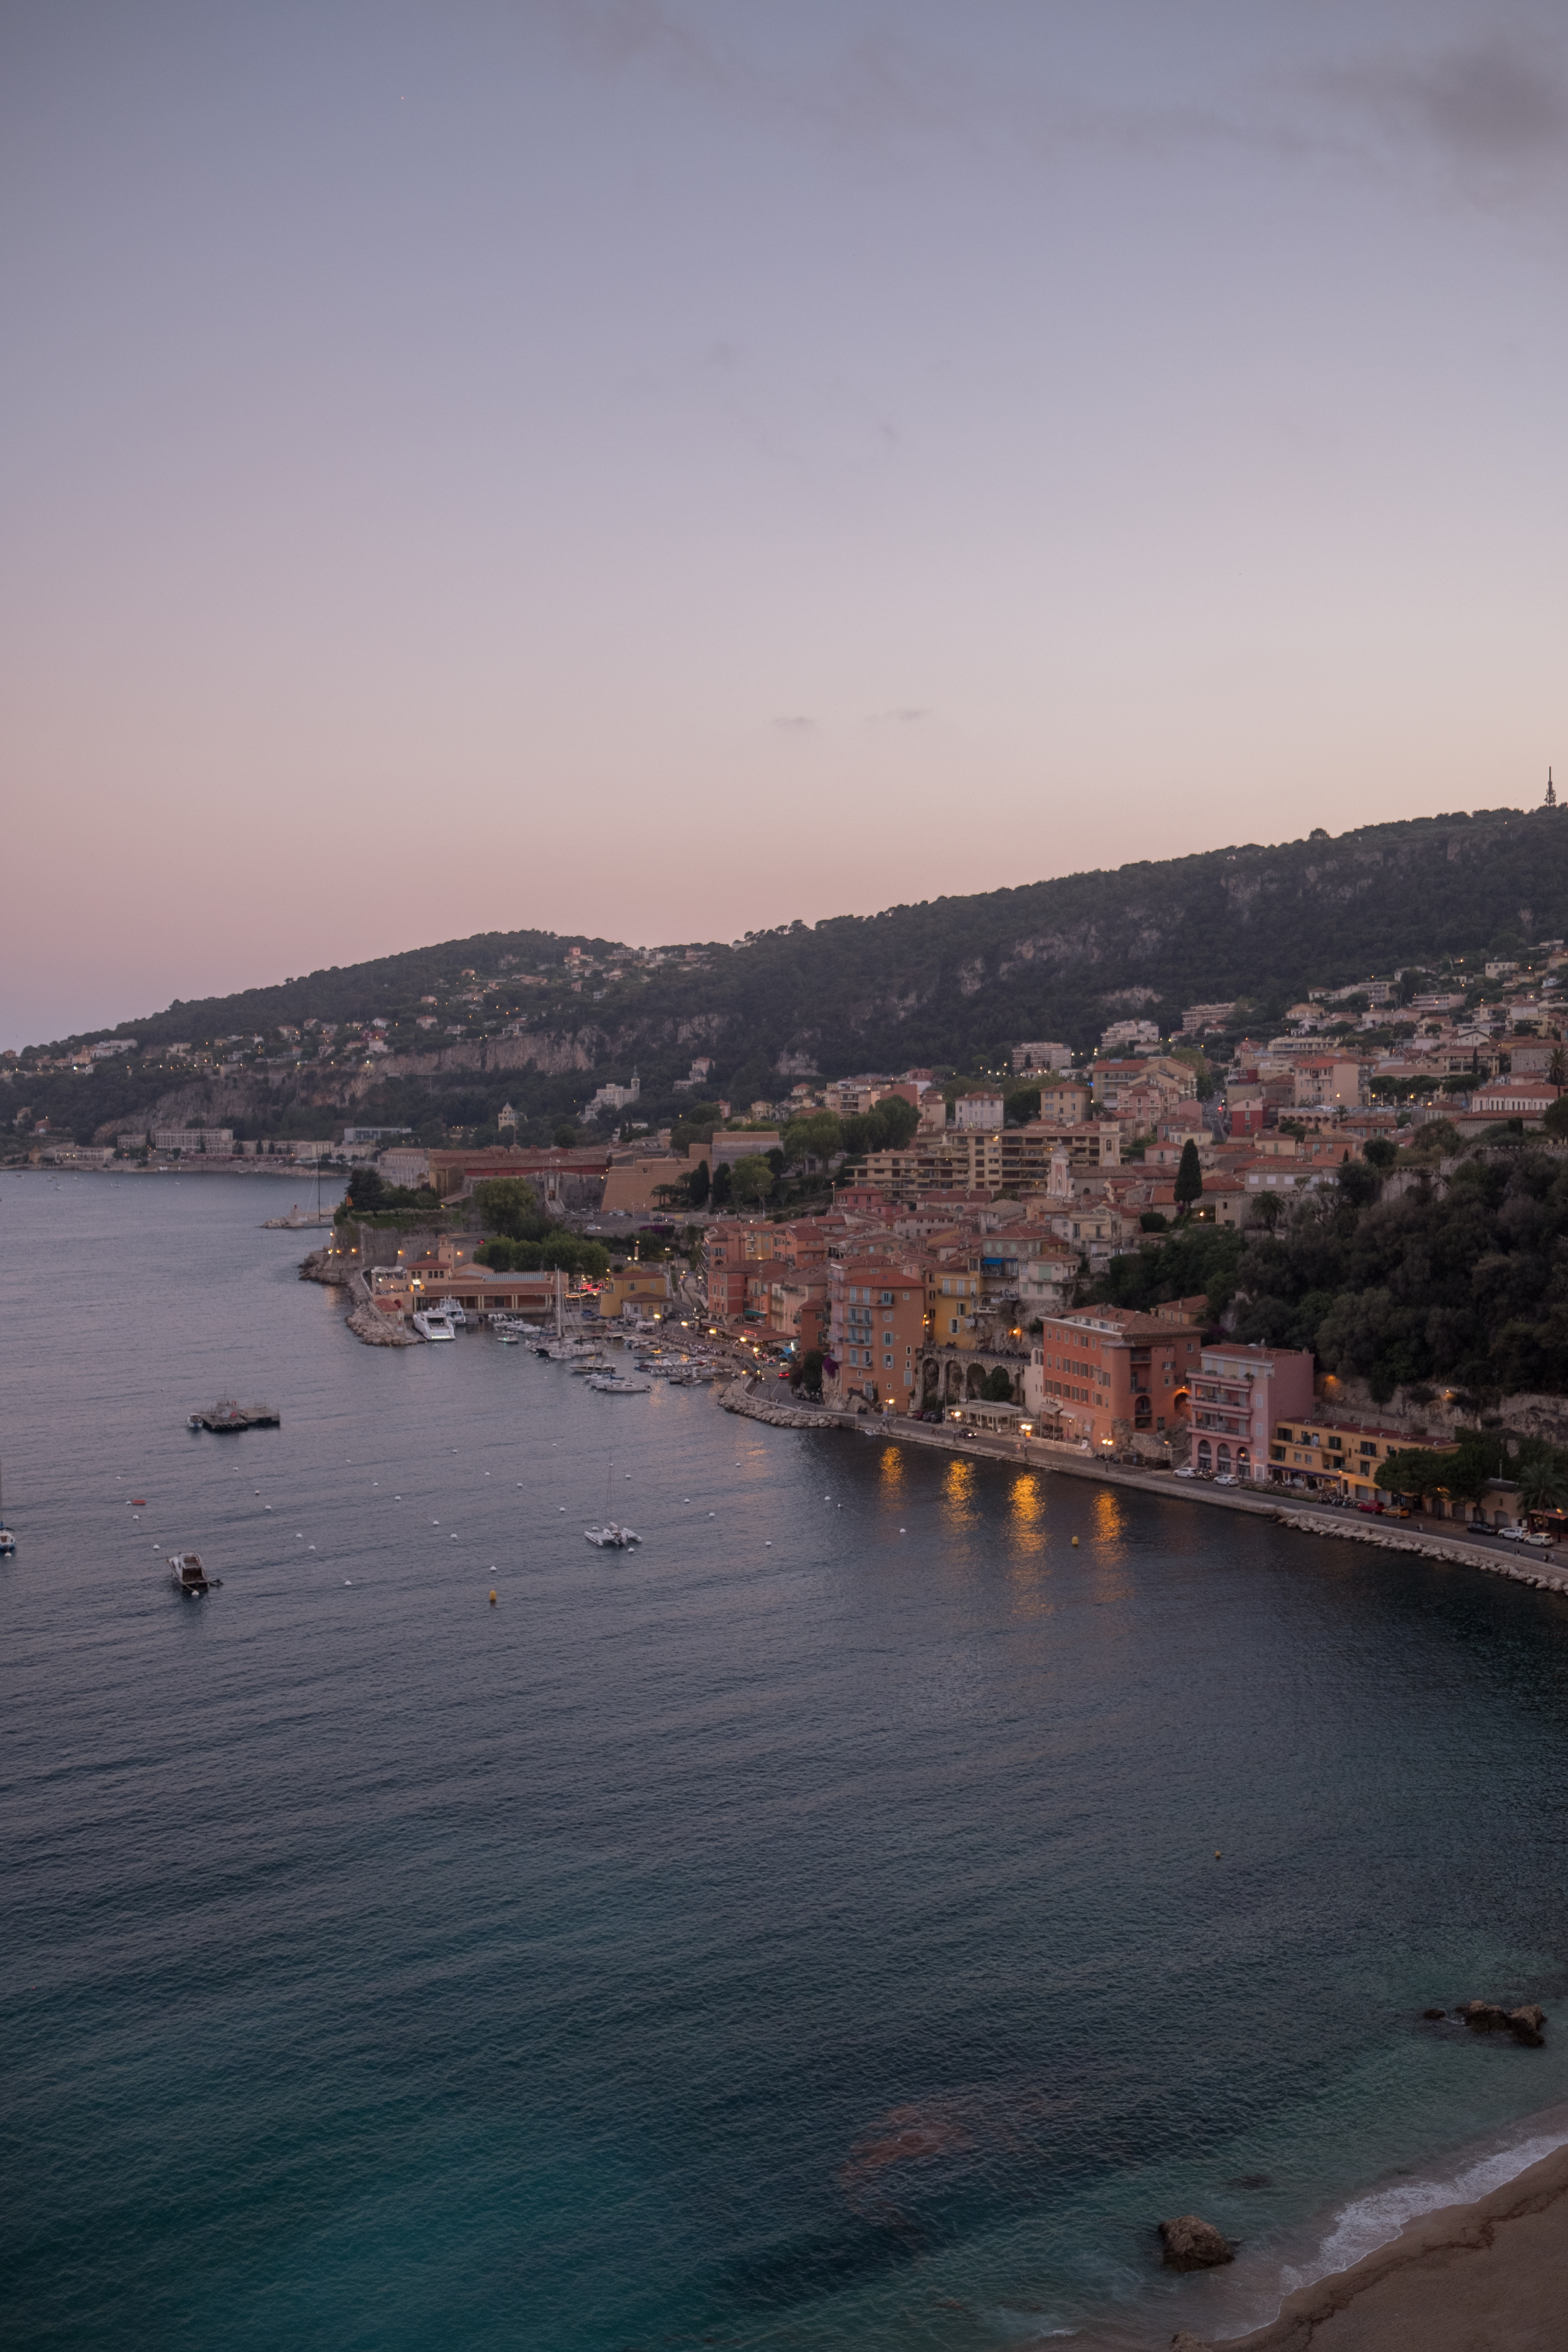 Villefranche sur Mer - another must-visit on your list of the places to see in the South of France /Photo Credit Sonia Mota